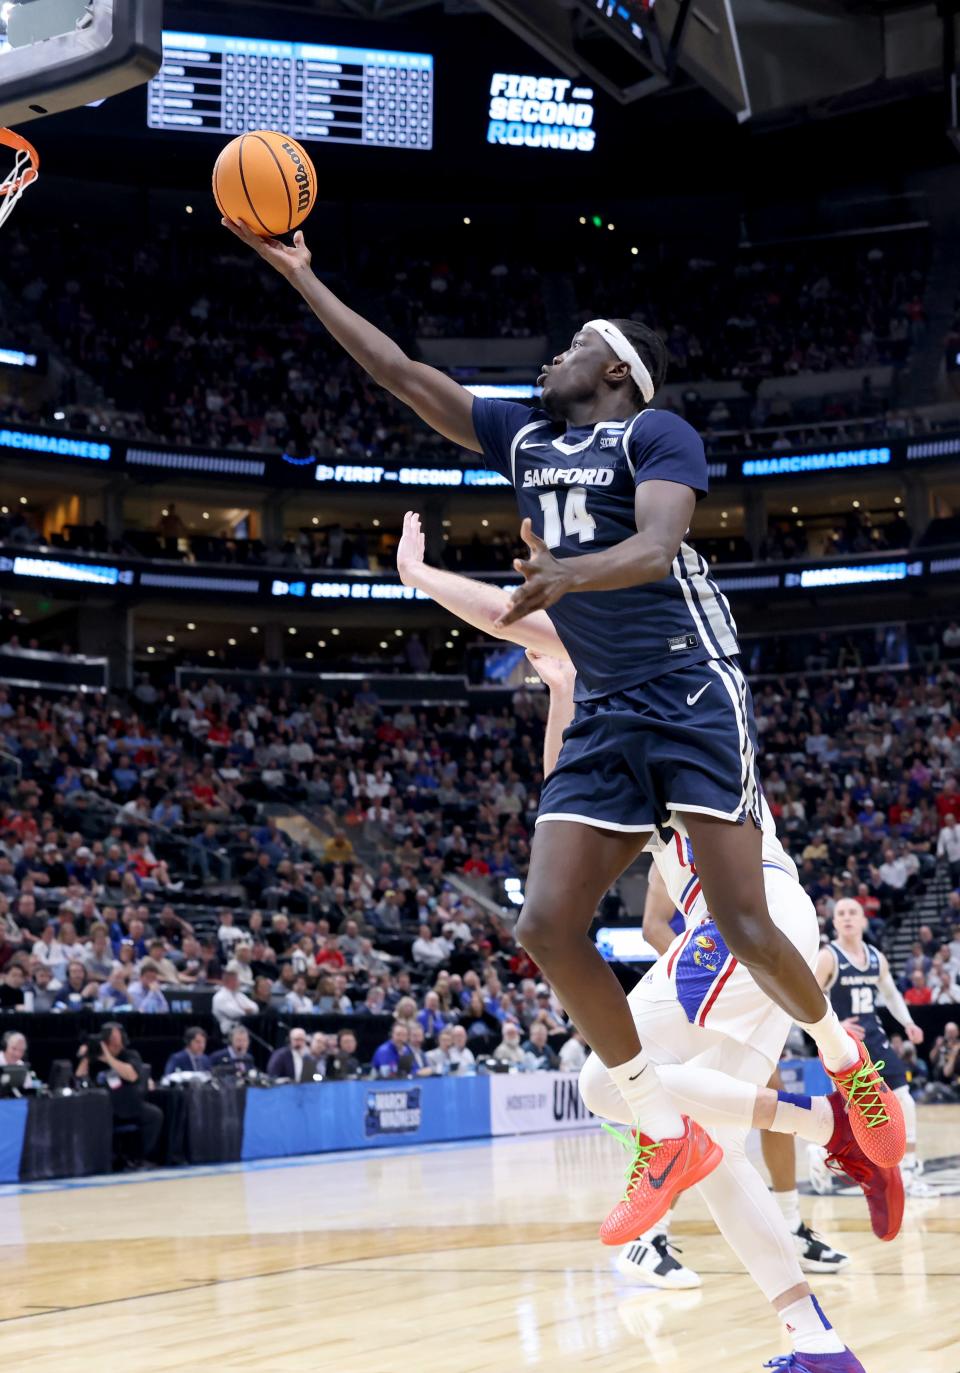 Former Samford forward Achor Achor (14) shoots during the Bulldogs' first-round NCAA Tournament game against Kansas on March 21 in Salt Lake City, Utah. Achor has committed to Kansas State for the 2024-25 season.